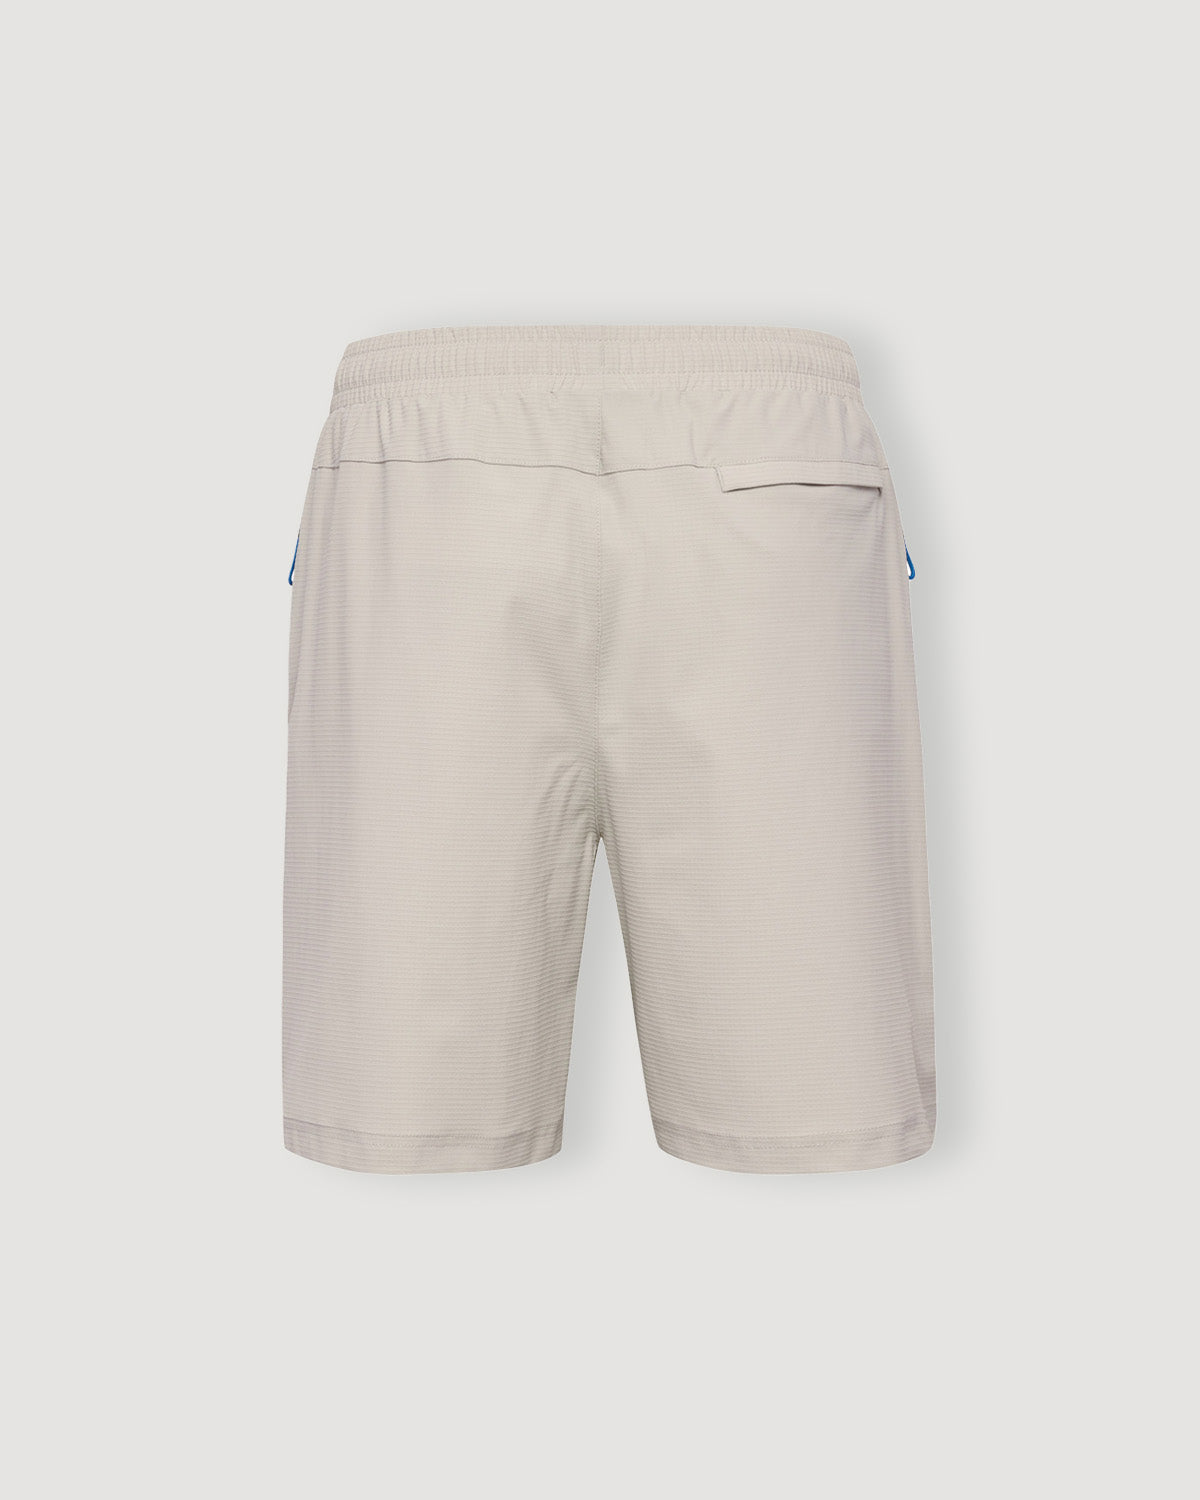 Halo Jeeps Shorts - Silver Lining